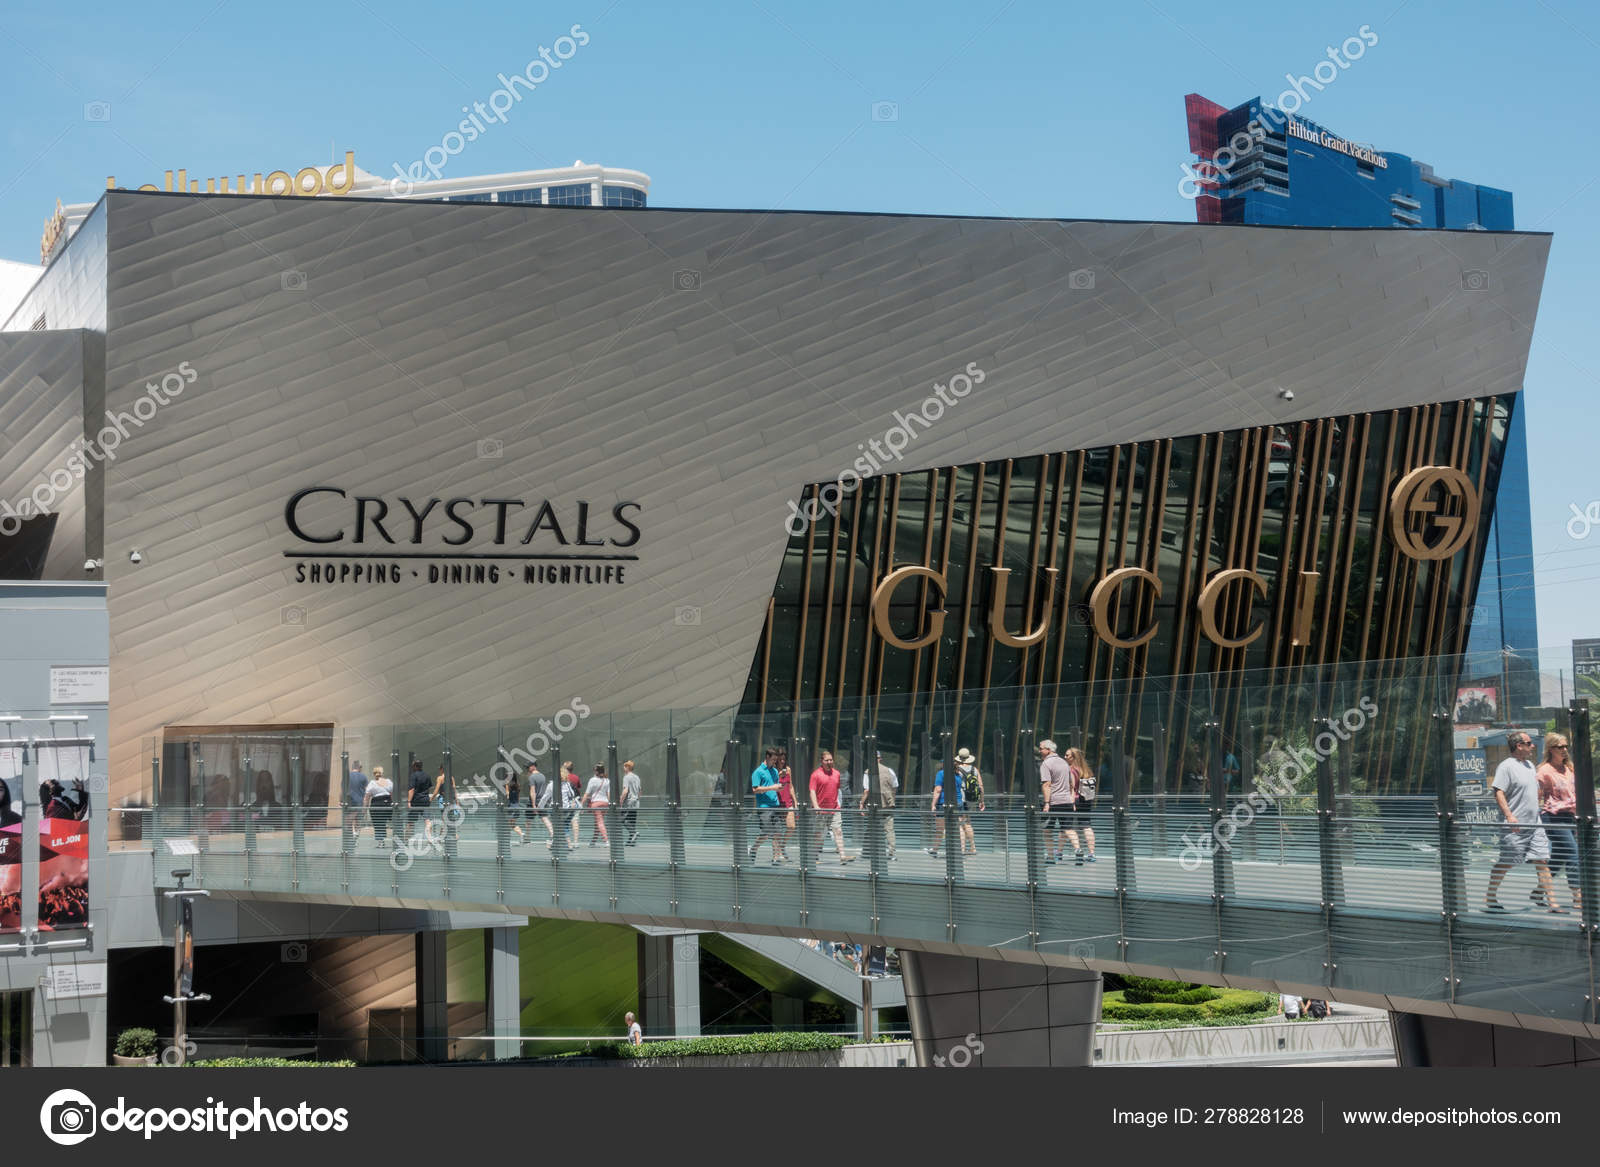 Gucci store Stock Photos, Royalty Free Gucci store Images | Depositphotos